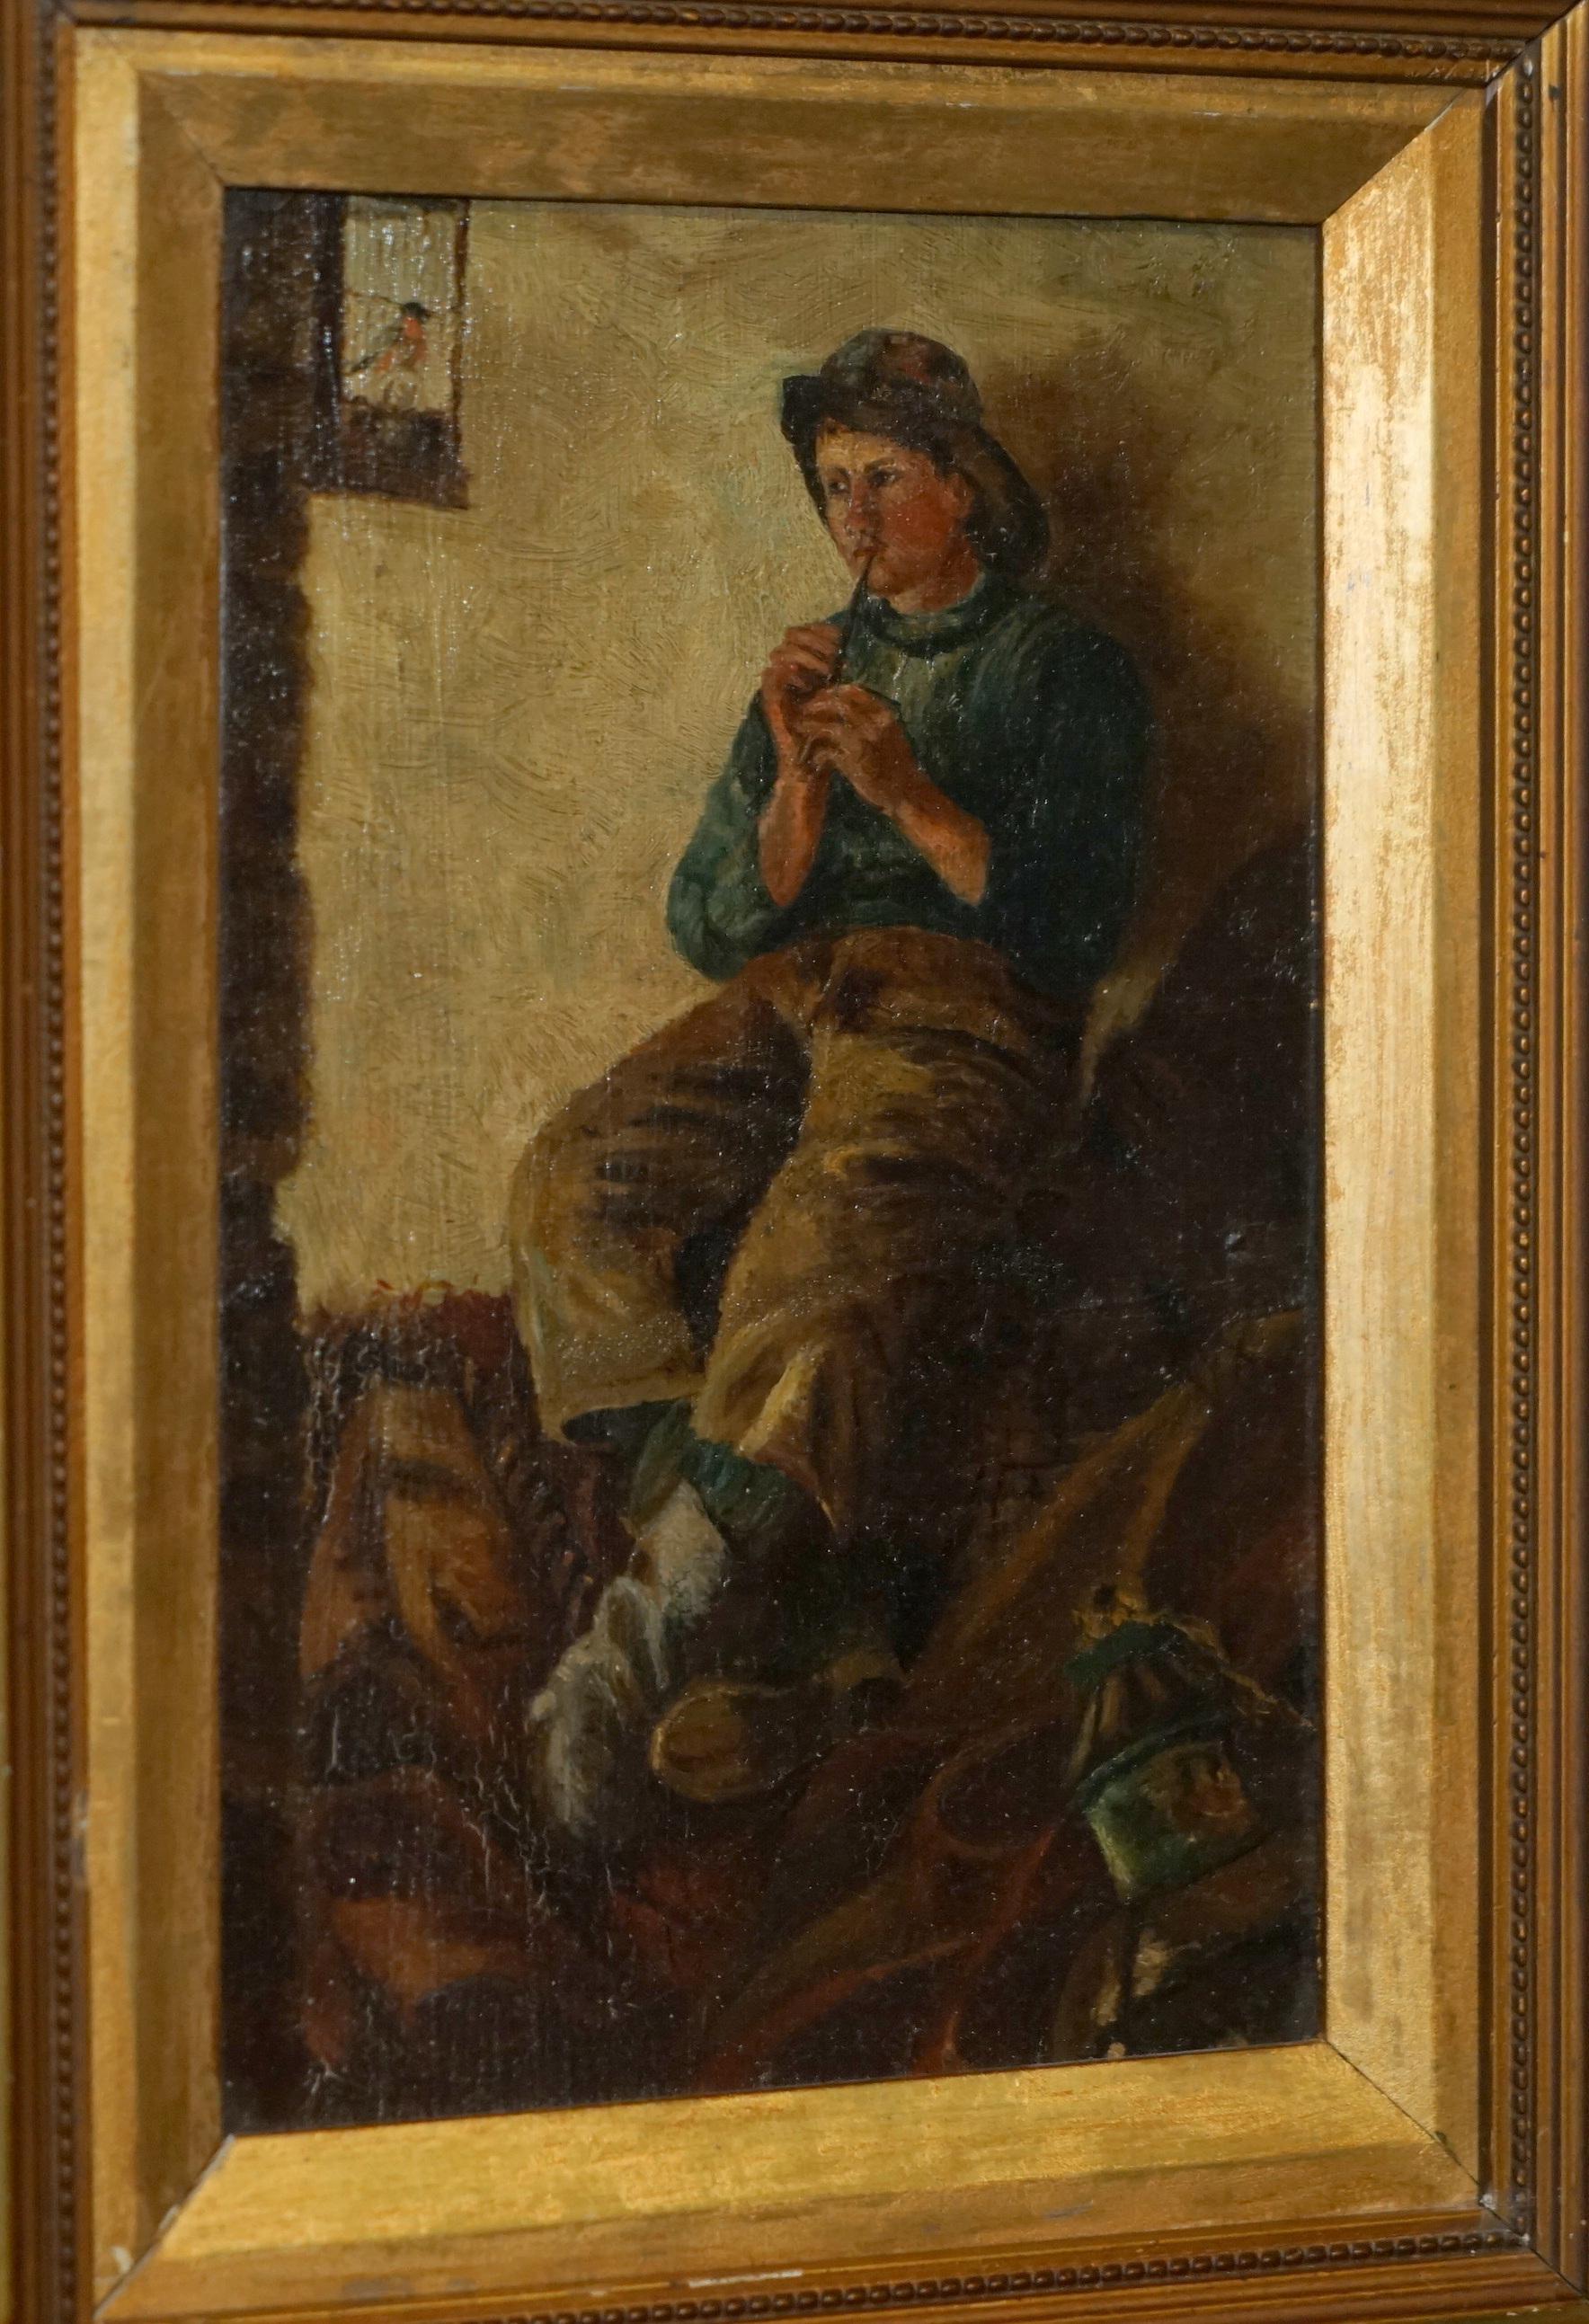 High Victorian SUBLIME ANTIQUE ViCTORIAN OIL PAINTING OF A YOUNG BOY (FISHERMAN) PLAYING A PIPE